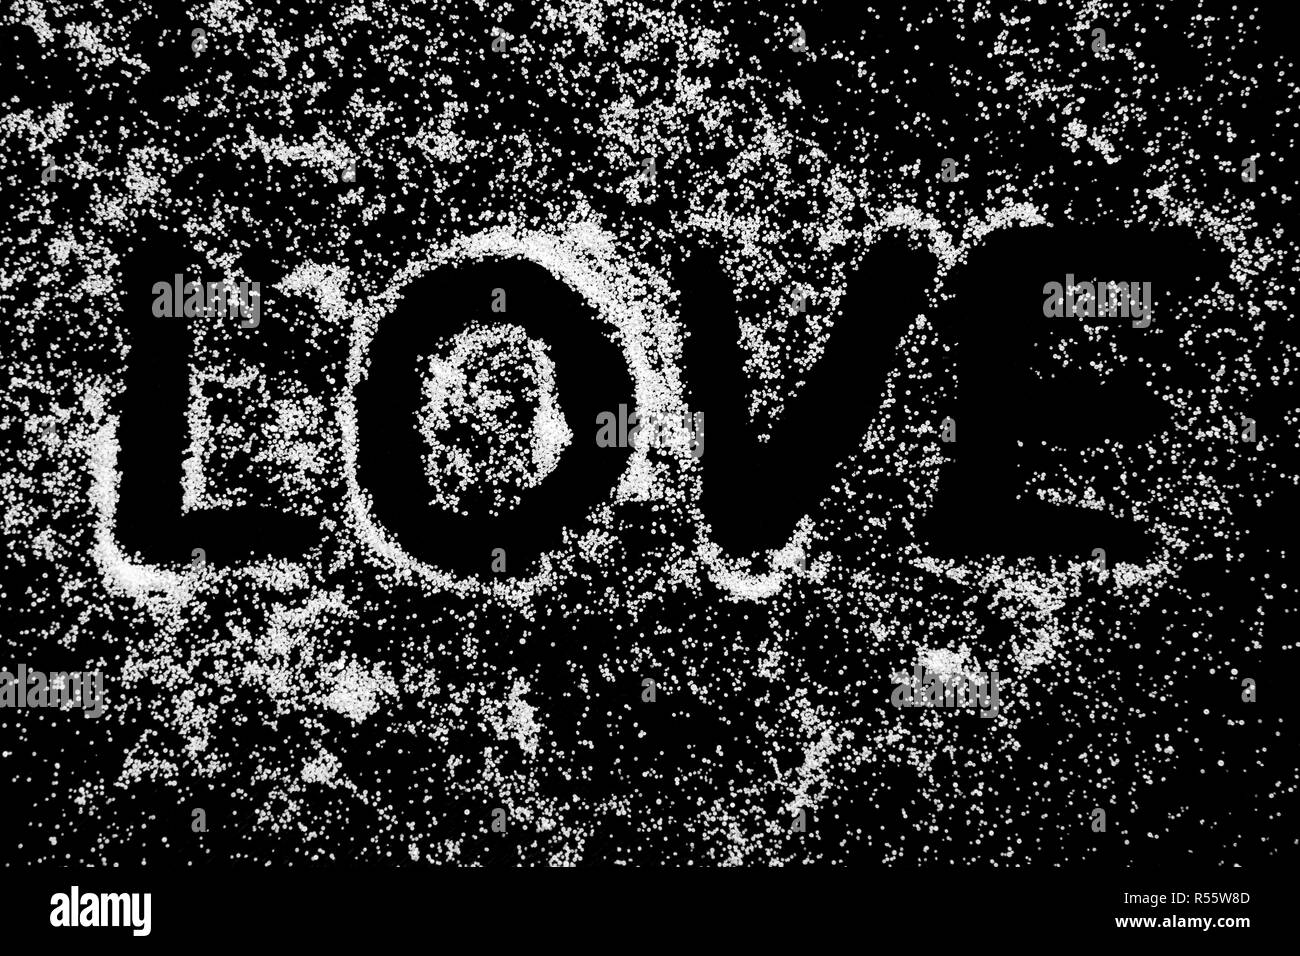 Love word symbol drawing by finger on white snow salt powder on black background. Capital letters. Romantic St. Valentines Day holidays concept with place for text. Copy space. Stock Photo